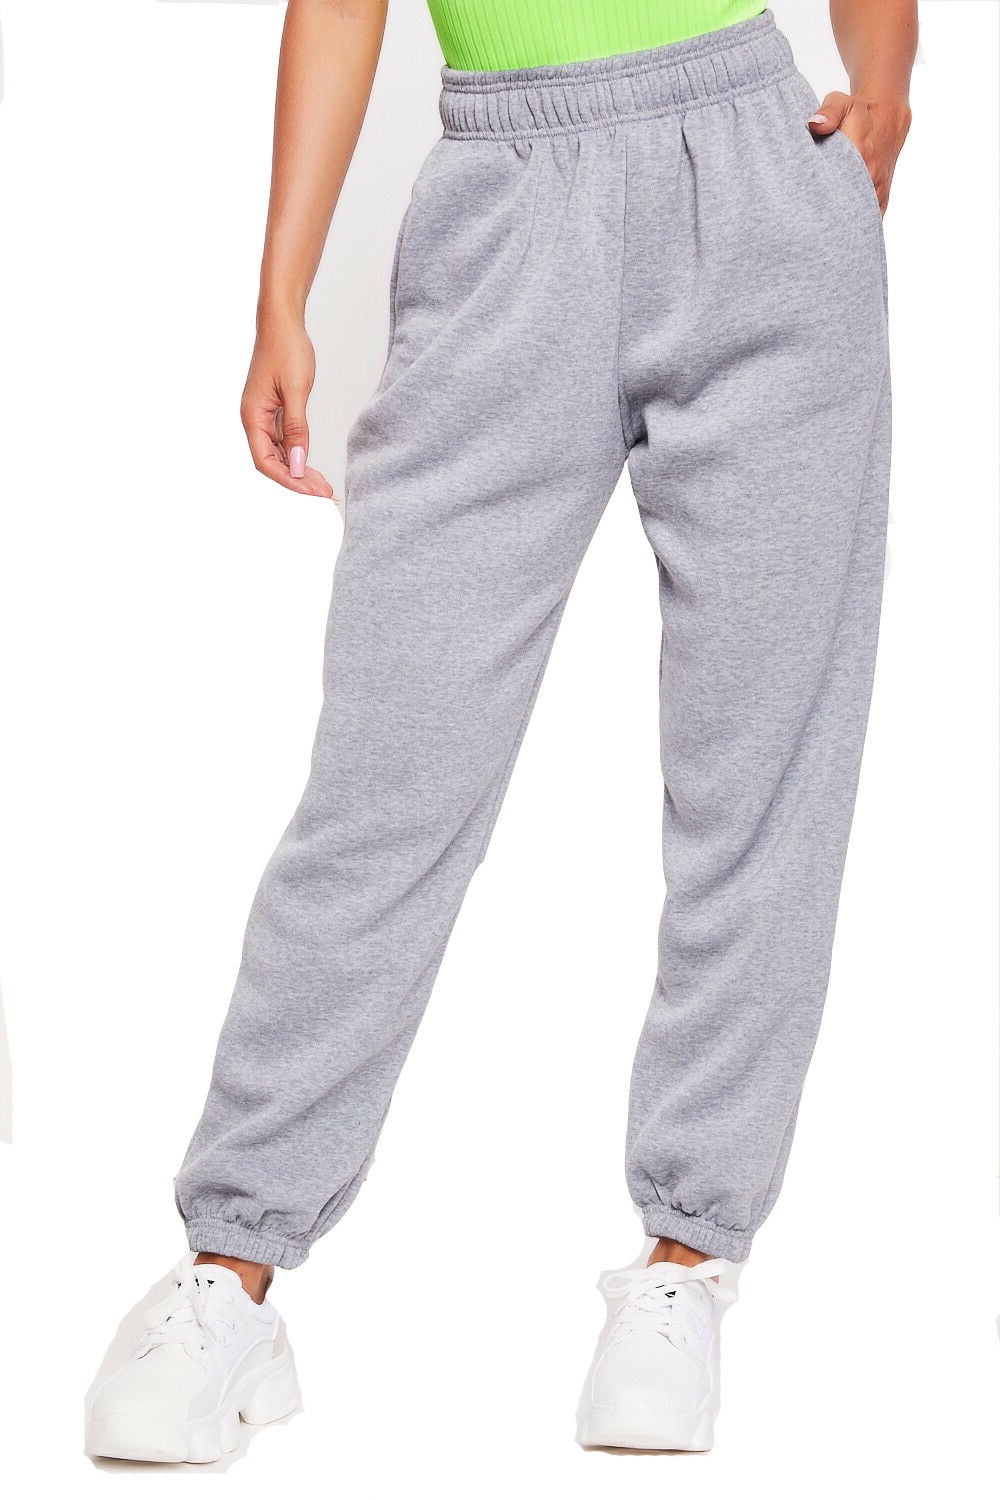 How To Cuff Sweats Outlet Discount, Save 40% | jlcatj.gob.mx